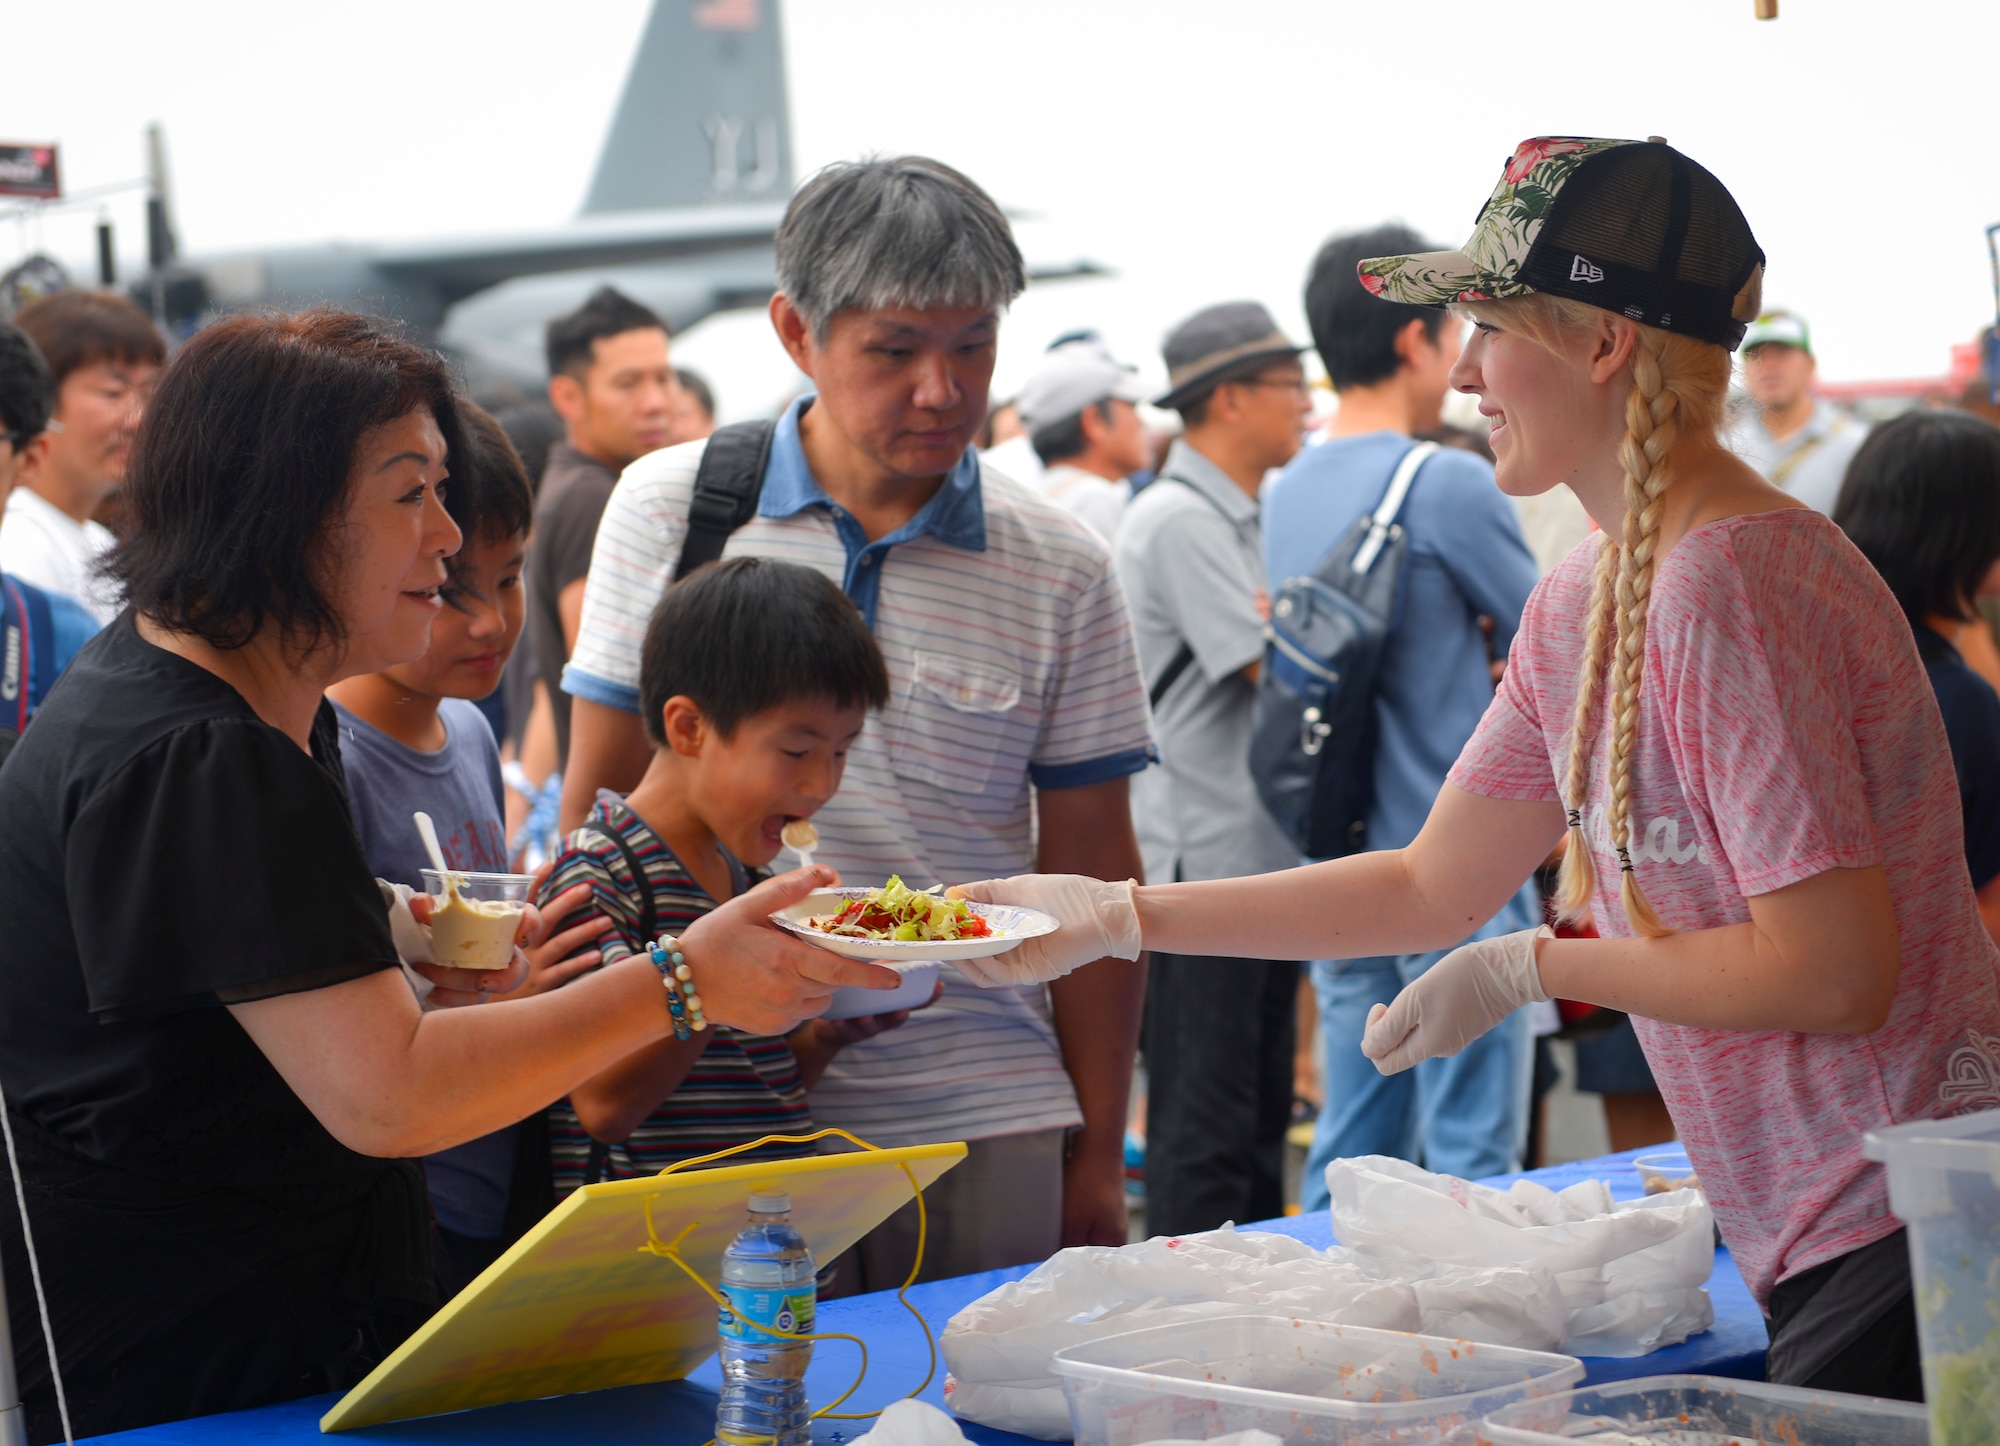 Festivalgoers purchase food from a booth at the 2016 Japanese-American Friendship Festival at Yokota Air Base, Japan, Sept. 18, 2016. The festival is held annually and offers the US military on base a chance to share their work and culture with their off-base neighbors. More than 185,000 people attended in 2015. (U.S. Air Force photo by Airman 1st Class Elizabeth Baker/Released)